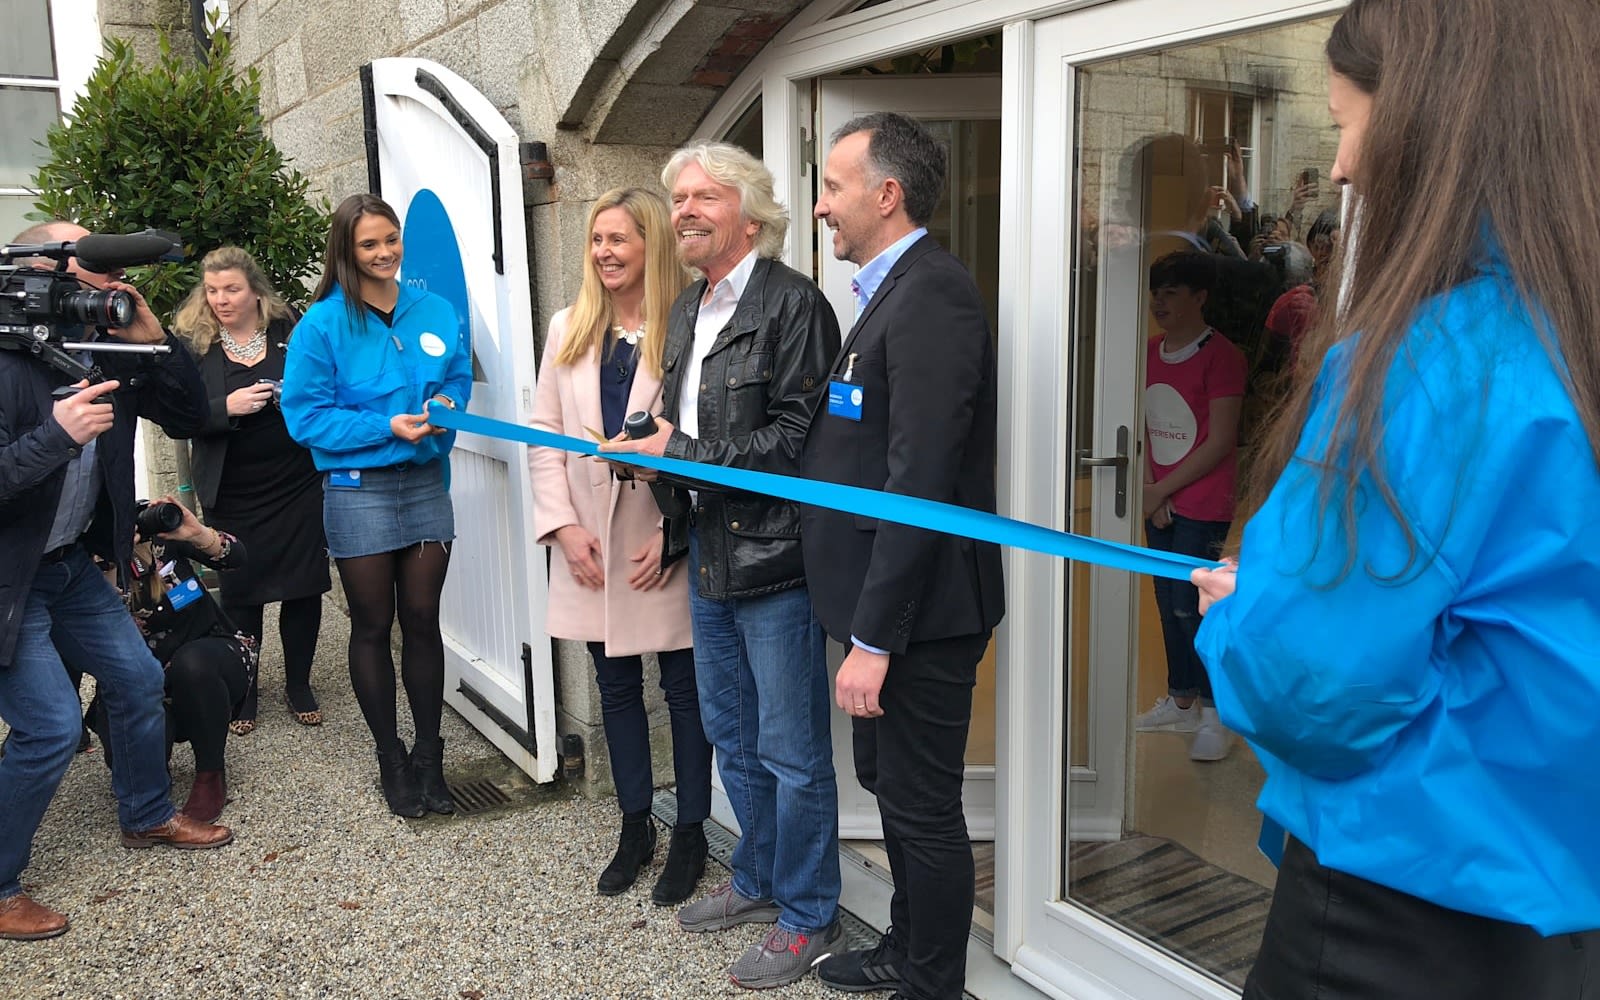 Richard Branson smiling and cutting a blue ribbon to open the new Cool Planet centre